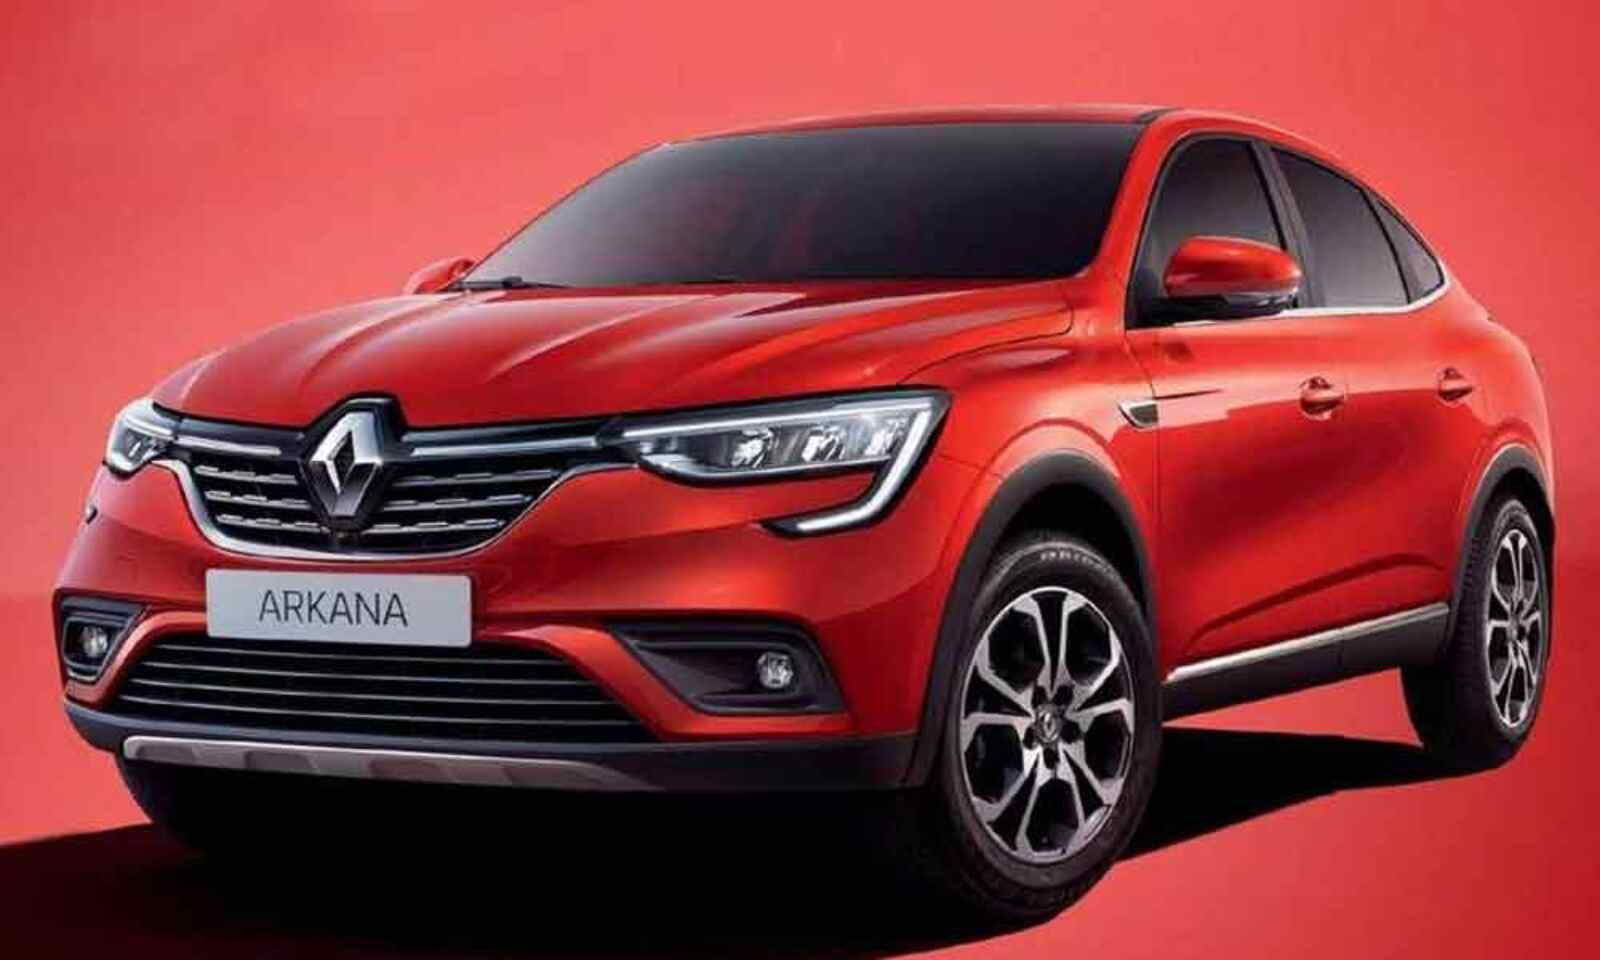 Renault India Considering the launch of Renault Arkana SUV